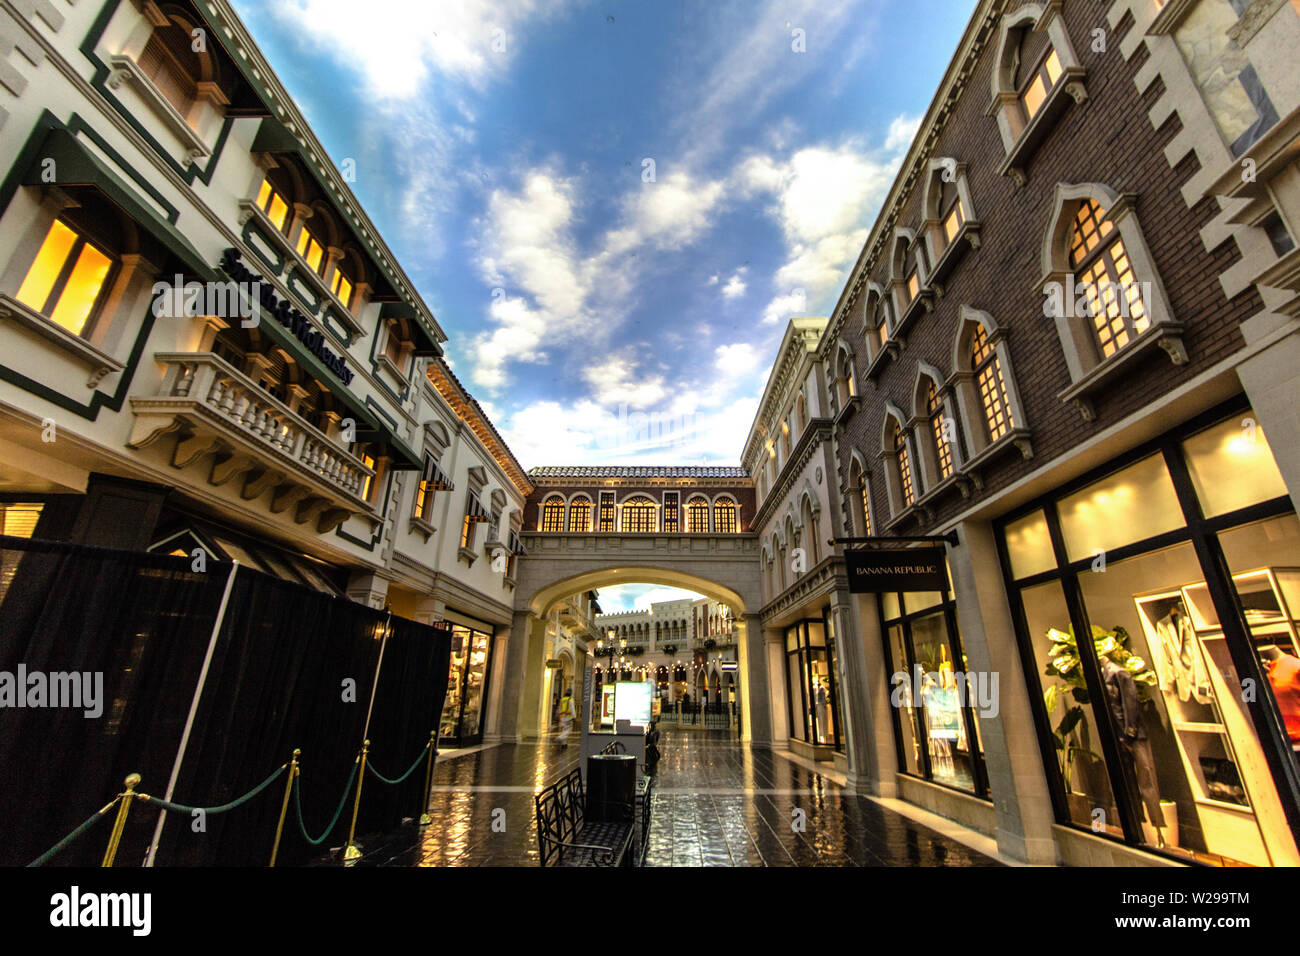 Las Vegas, Nevada, USA - May 6, 2019: Interior of the famous Venetian Grand Canal Shoppes in Las Vegas. Stock Photo